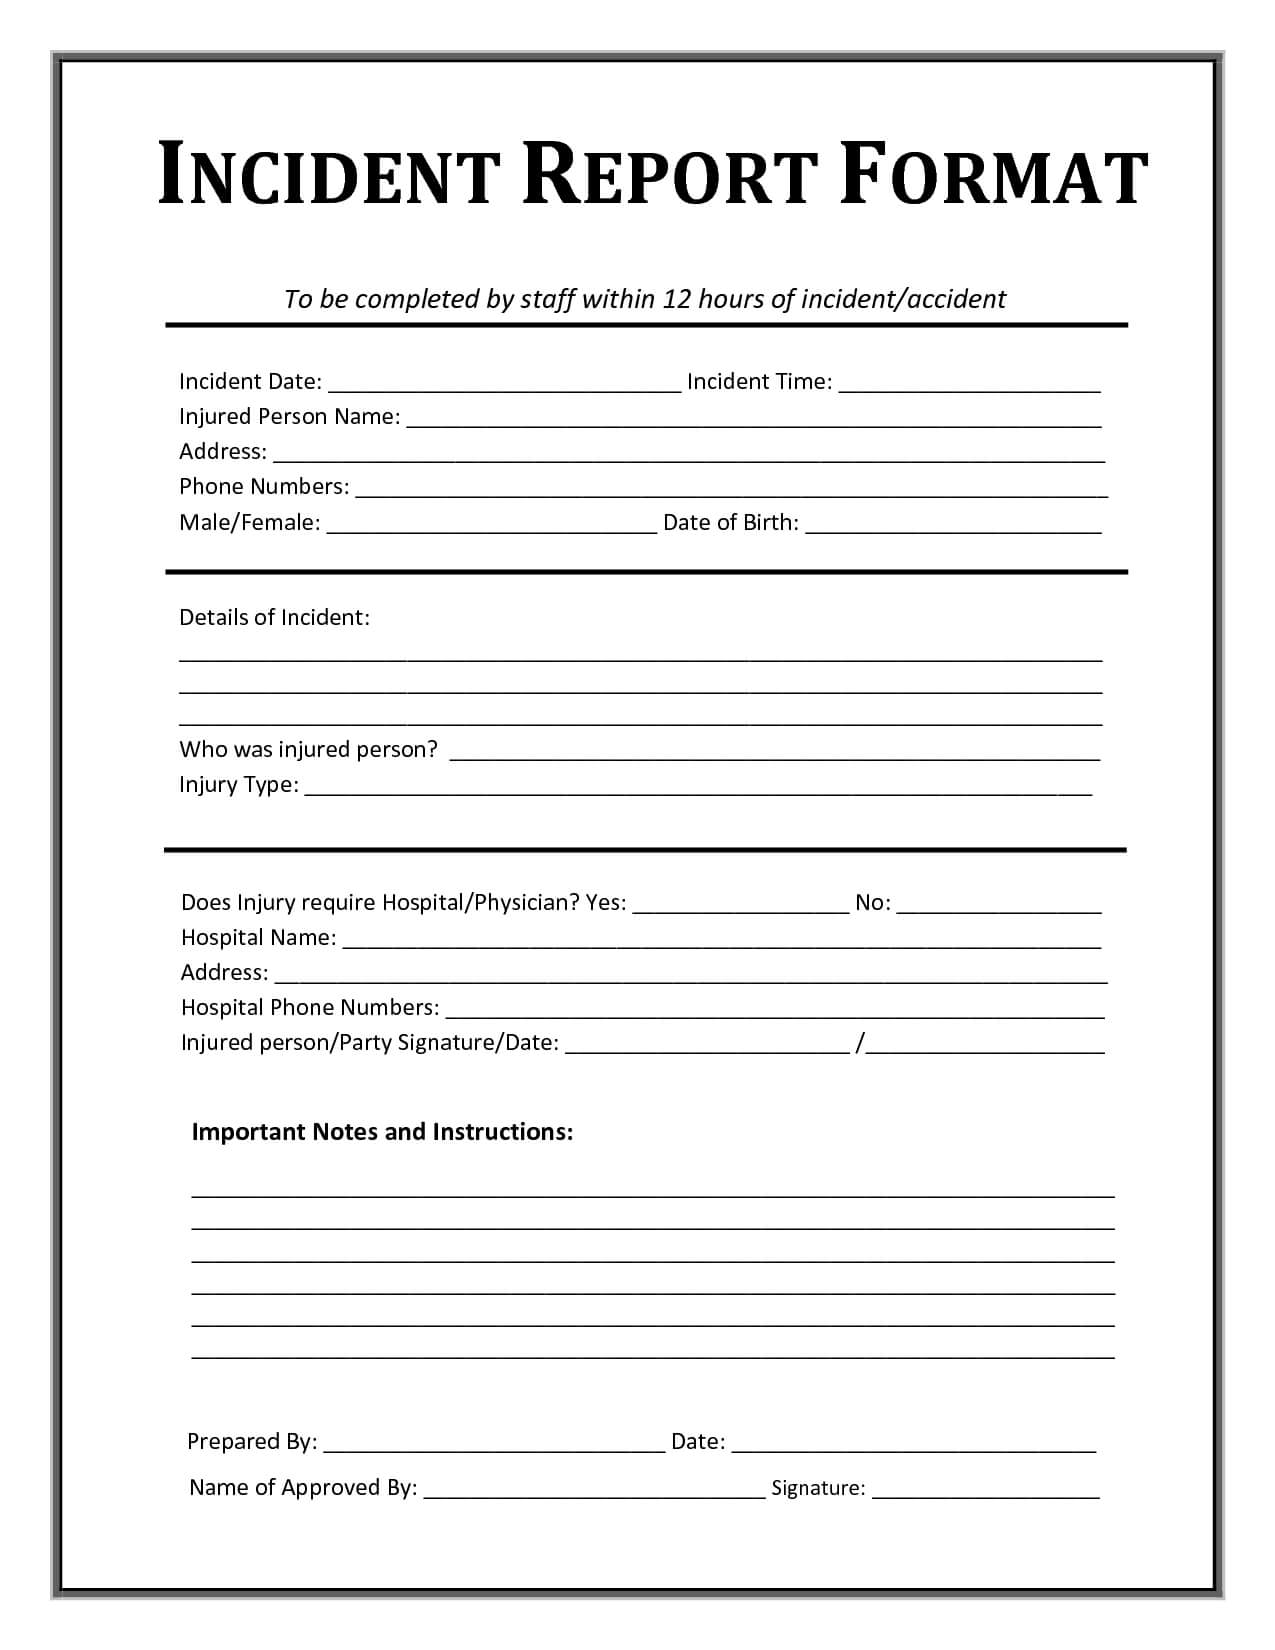 Incident Report Template | Incident Report Form, Incident Regarding Customer Incident Report Form Template